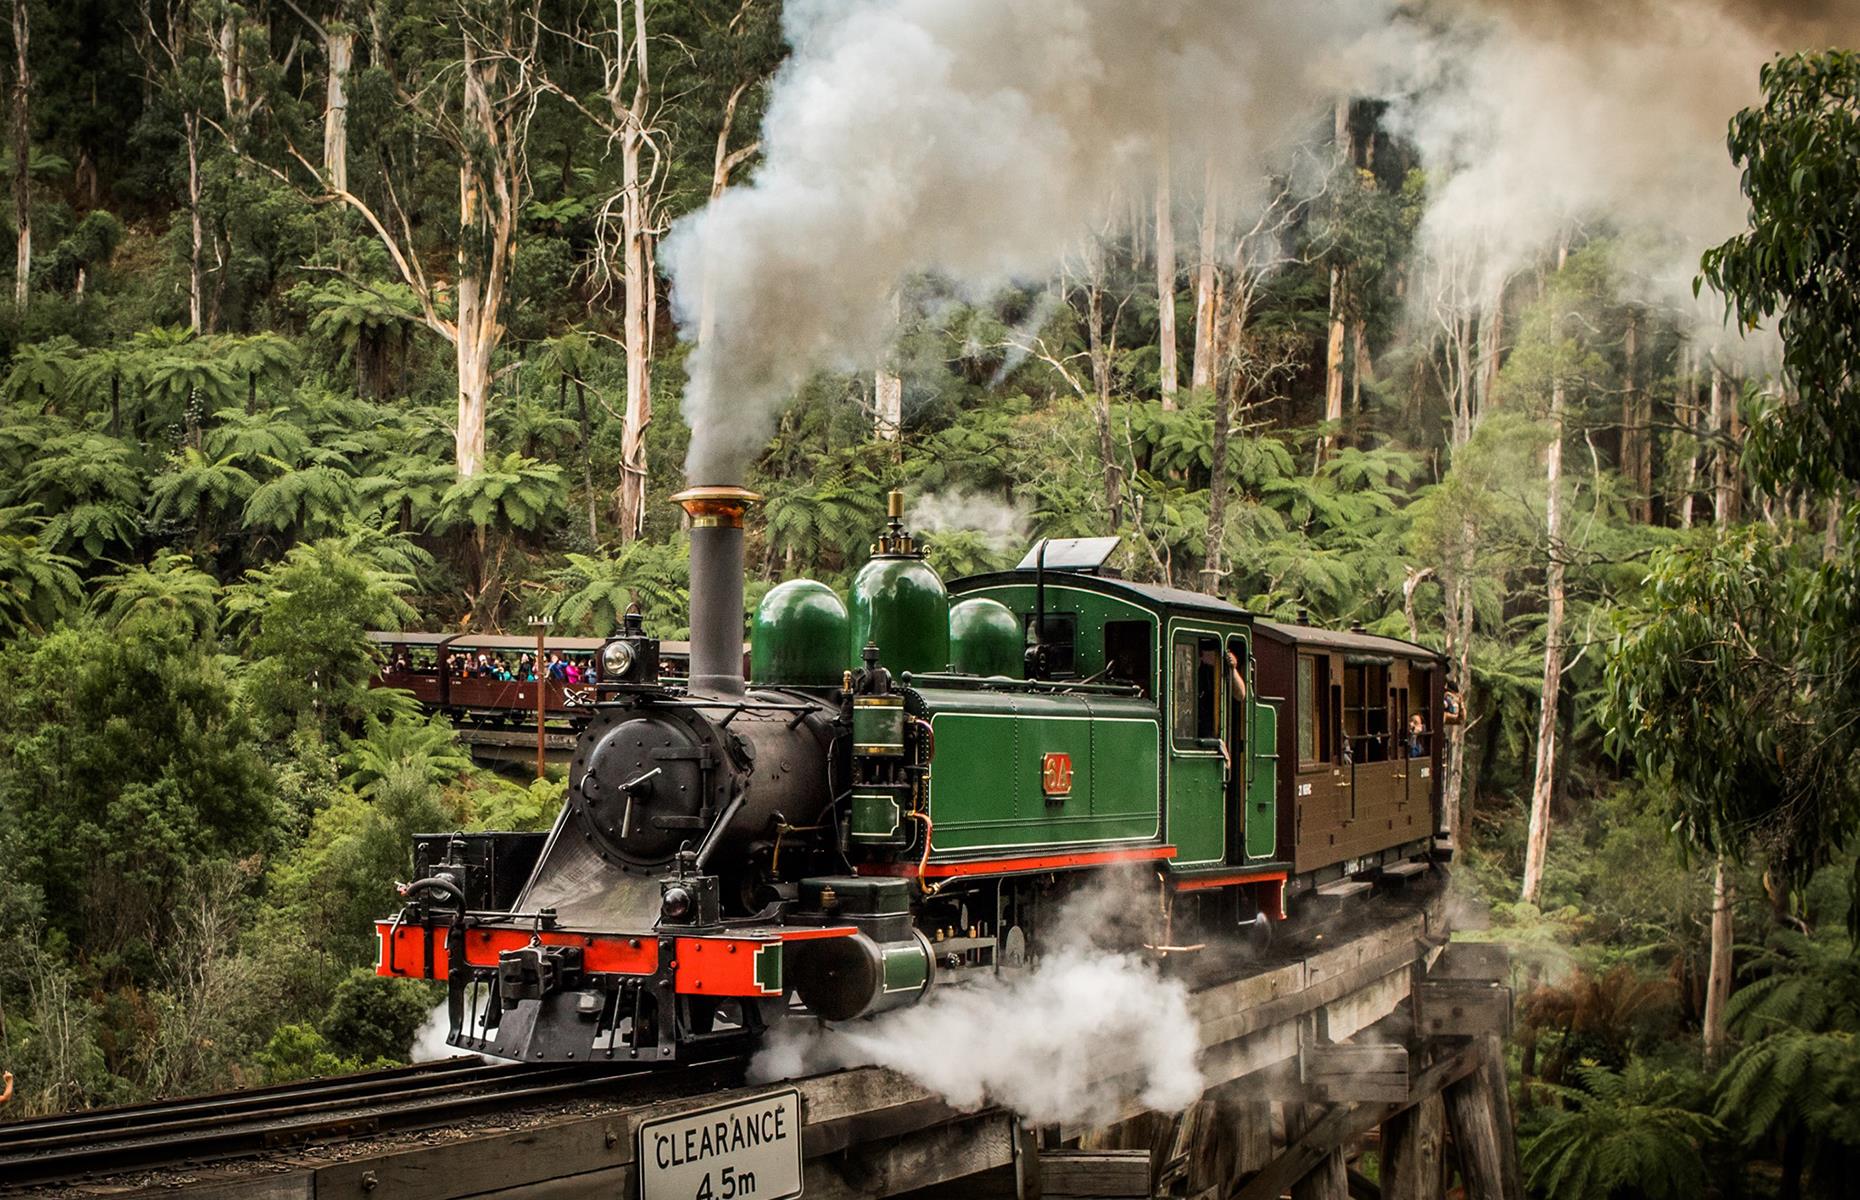 <p>Often named Australia's finest heritage railway, this is one for serious train fans and history buffs. Harking back to a by-gone era when steam locomotives ruled the rails, Puffing Billy is a relic of the 1920s that still races through the Dandenong Ranges on a one-and-a-half-hour journey. The only survivor of a failed attempt at introducing a series of narrow-gauge lines by the then-named Victorian Railways, Puffing Billy is a piece of living history. The journey goes from Belgrave into Sherbrooke Forest, to the intermediate station of Emerald and onto the historic township of Gembrook.</p>